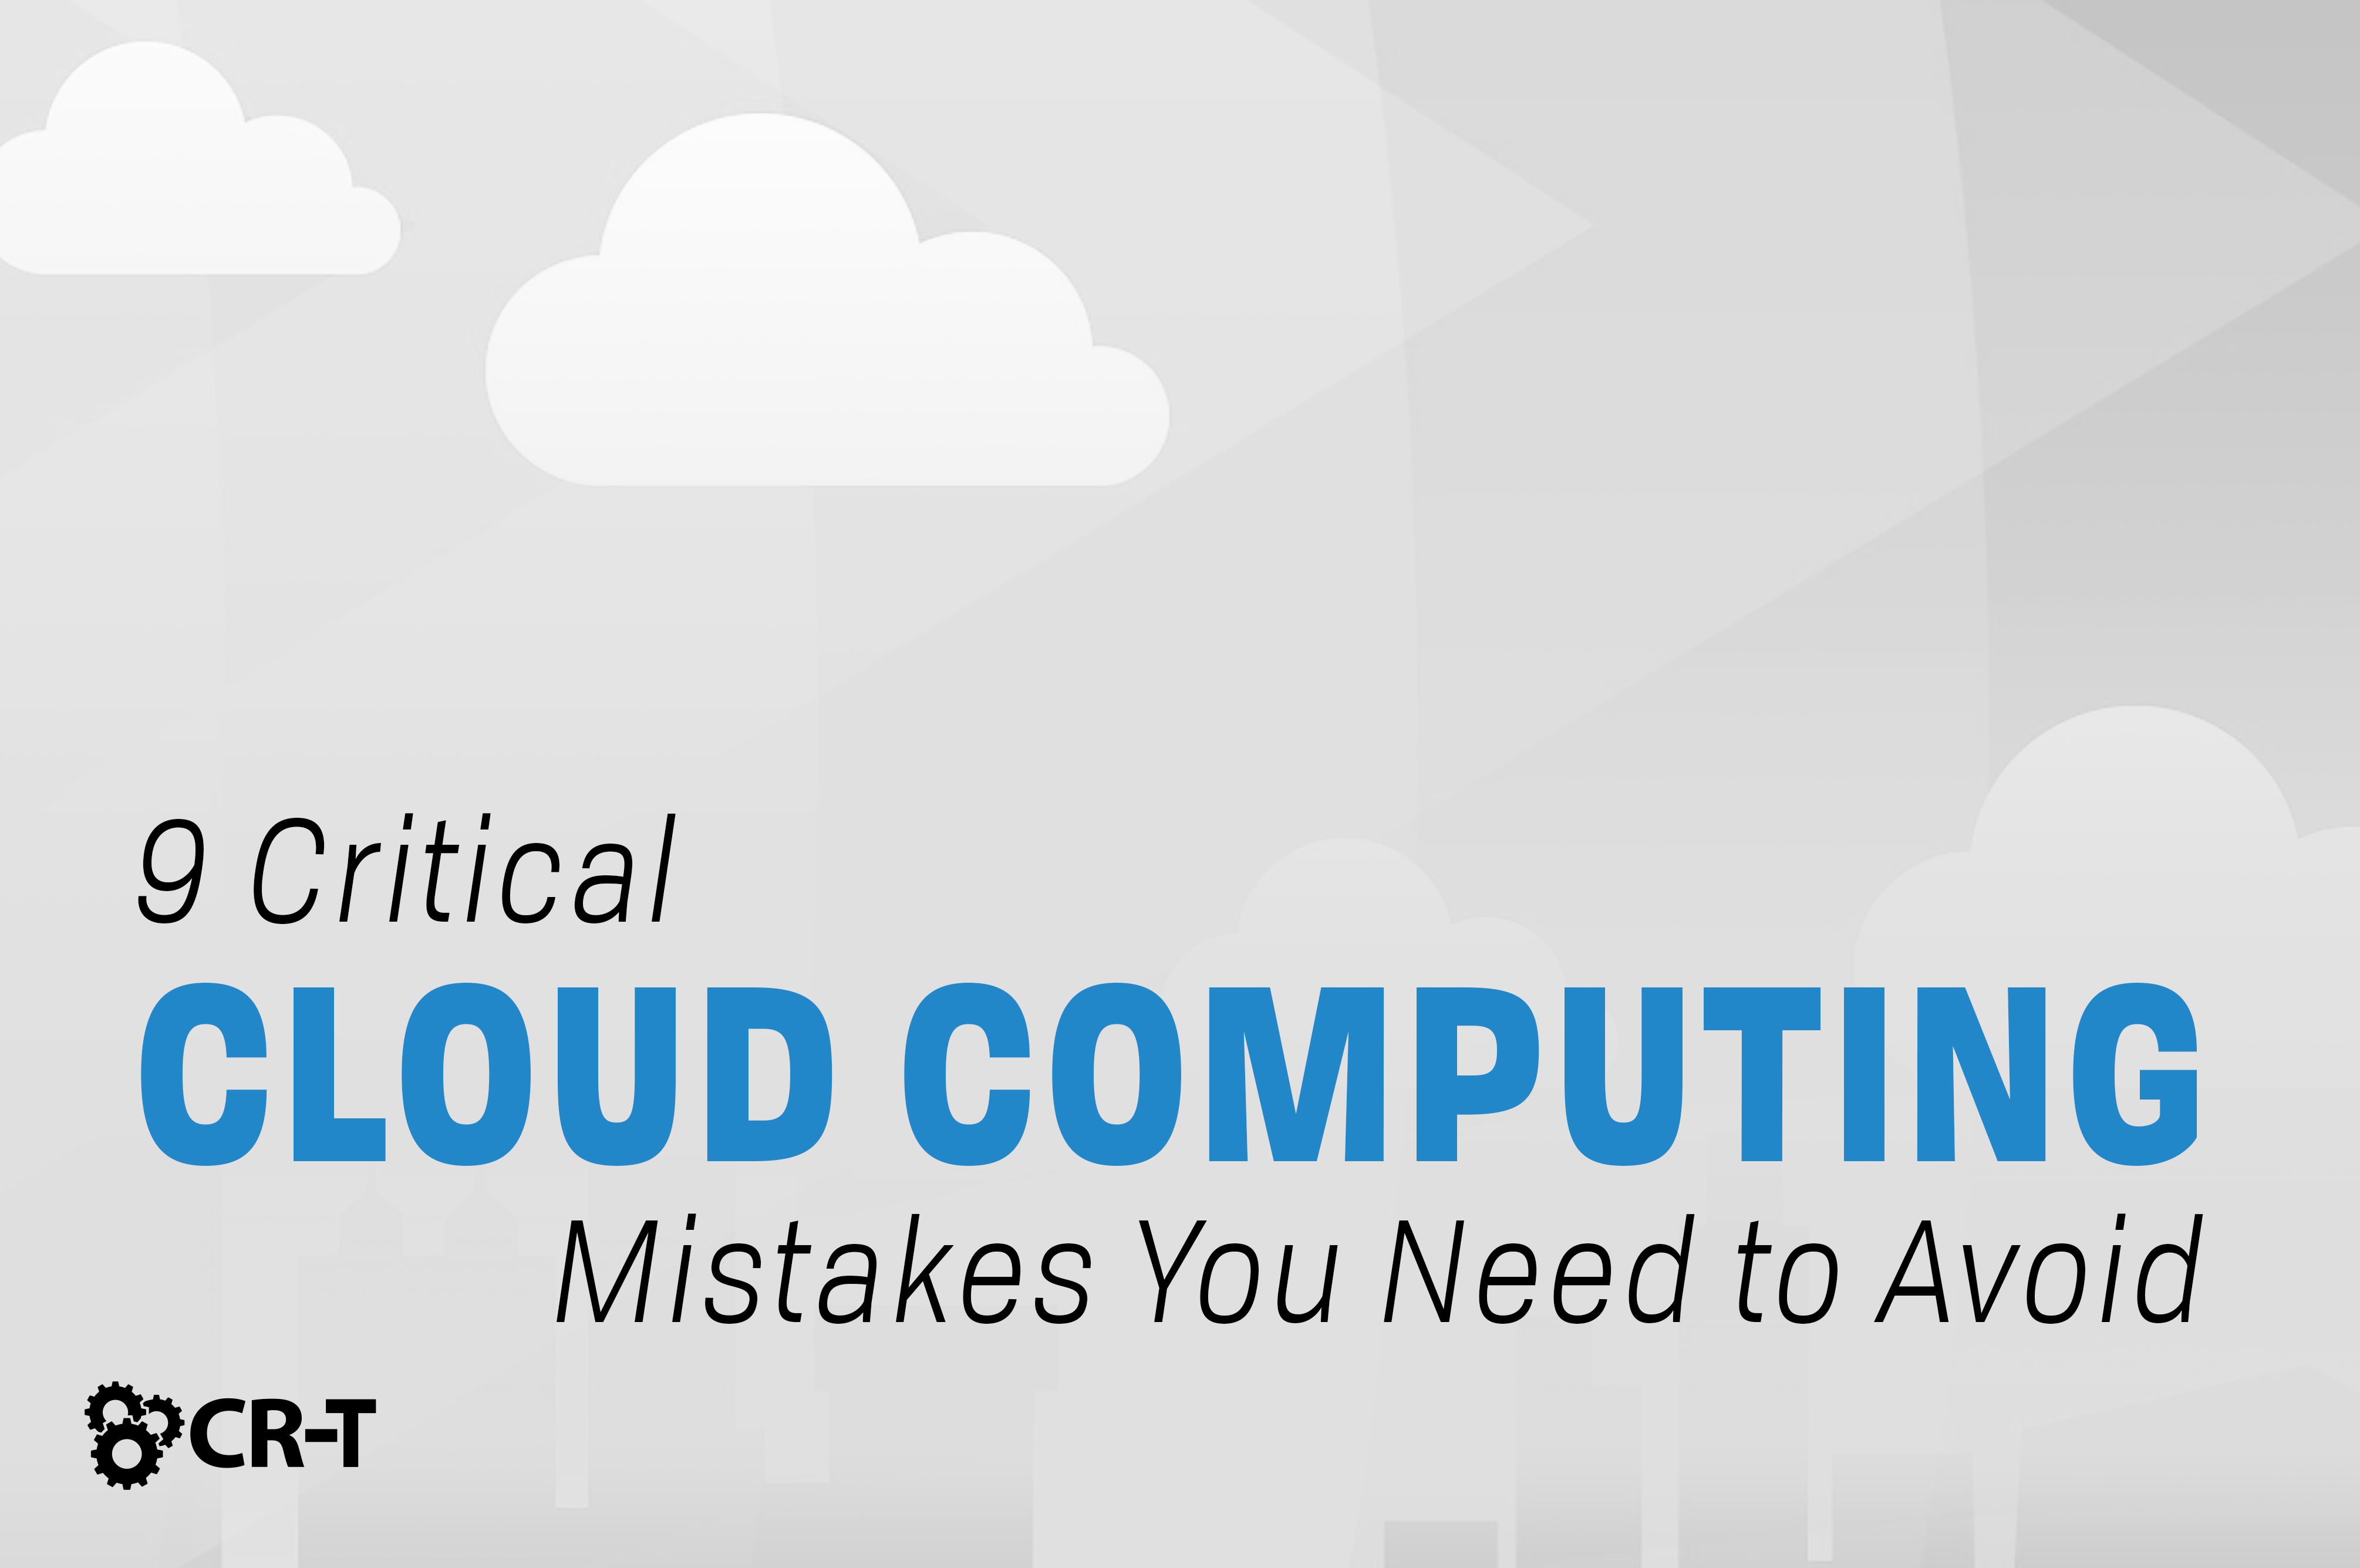 You are currently viewing 9 Critical Cloud Computing Mistakes You Need to Avoid